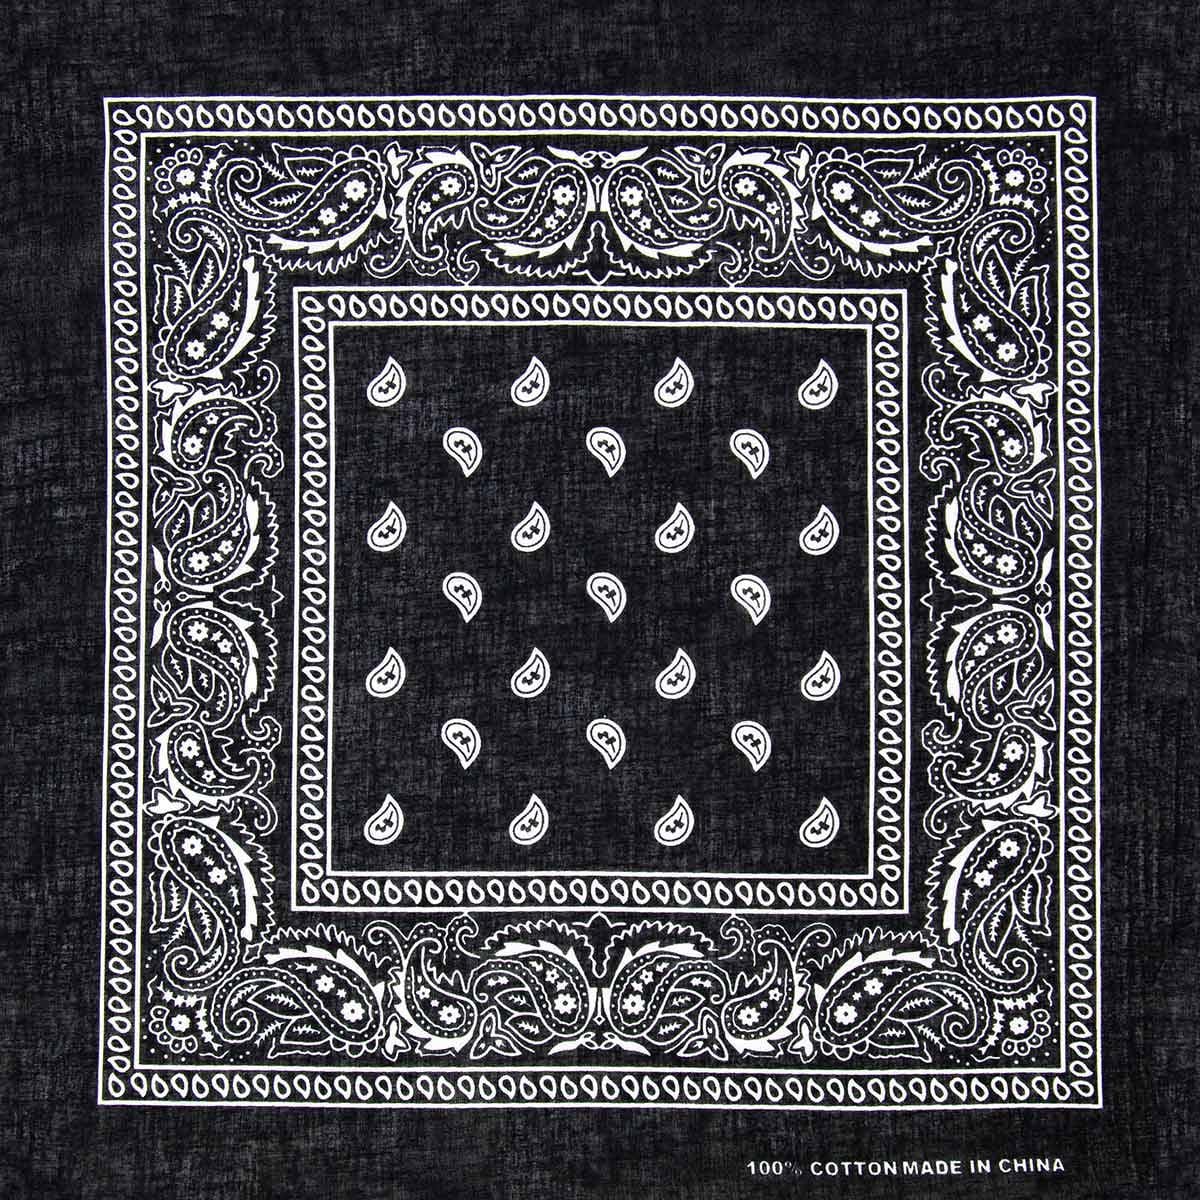 Buy Costume Accessories Black Bandana sold at Party Expert